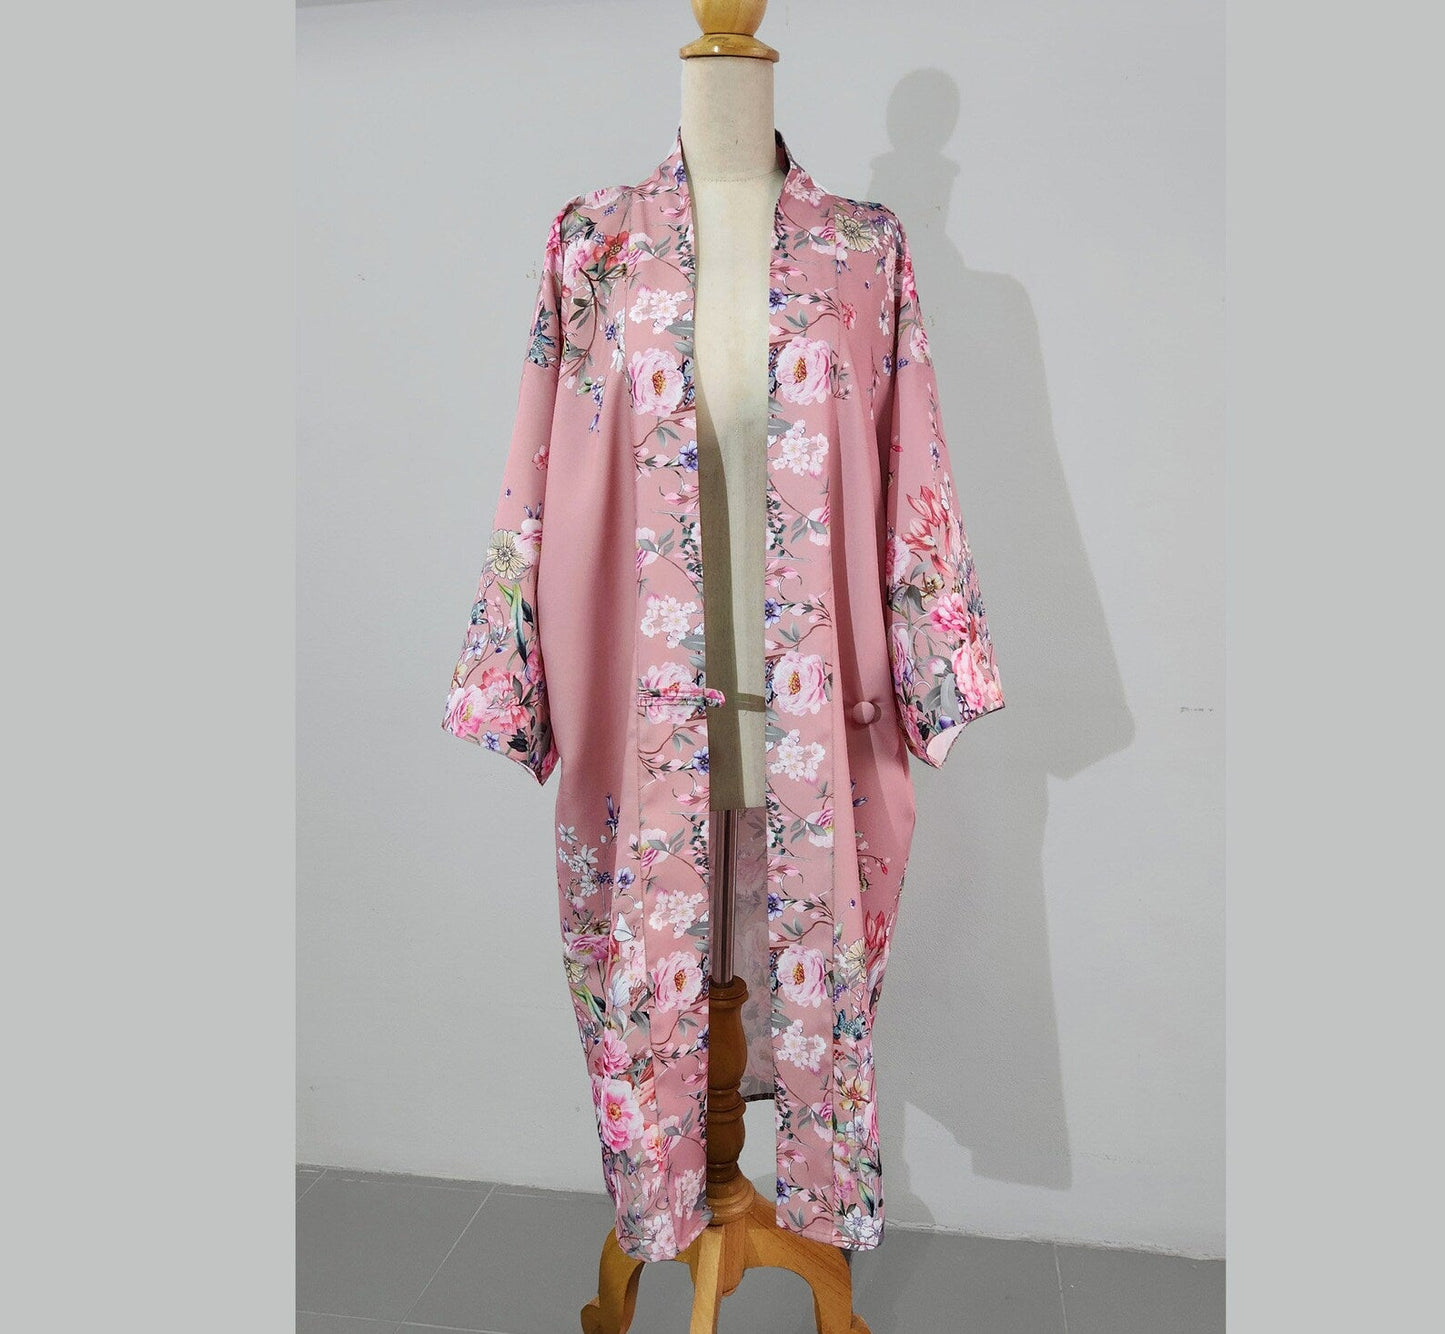 Mauve pink Japanese style and 1920s-inspired loungewear